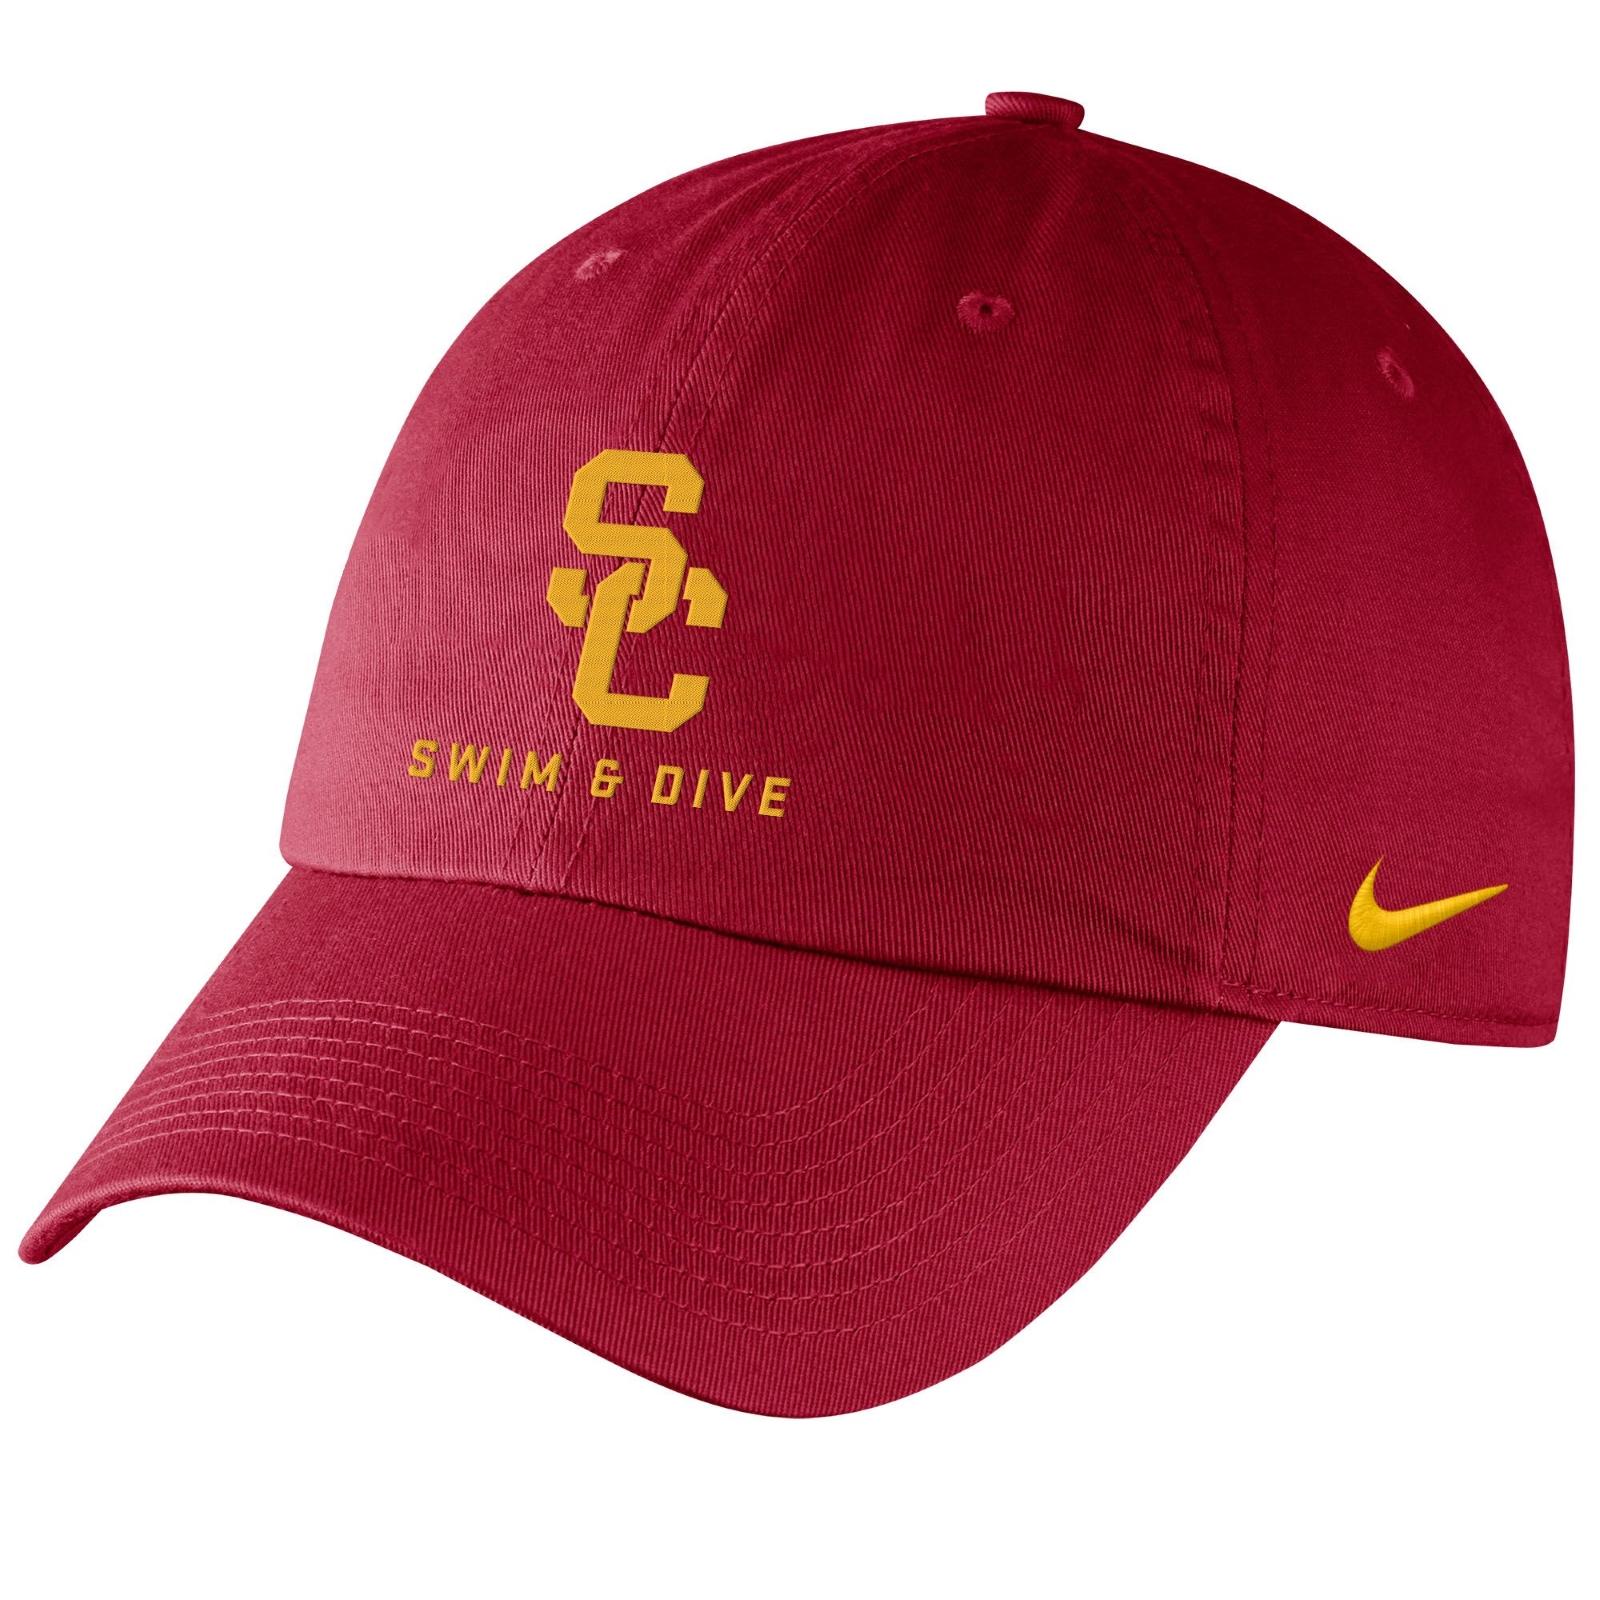 SC Int Swimming/Diving Unisex Campus Cap Cardinal Fits All image01